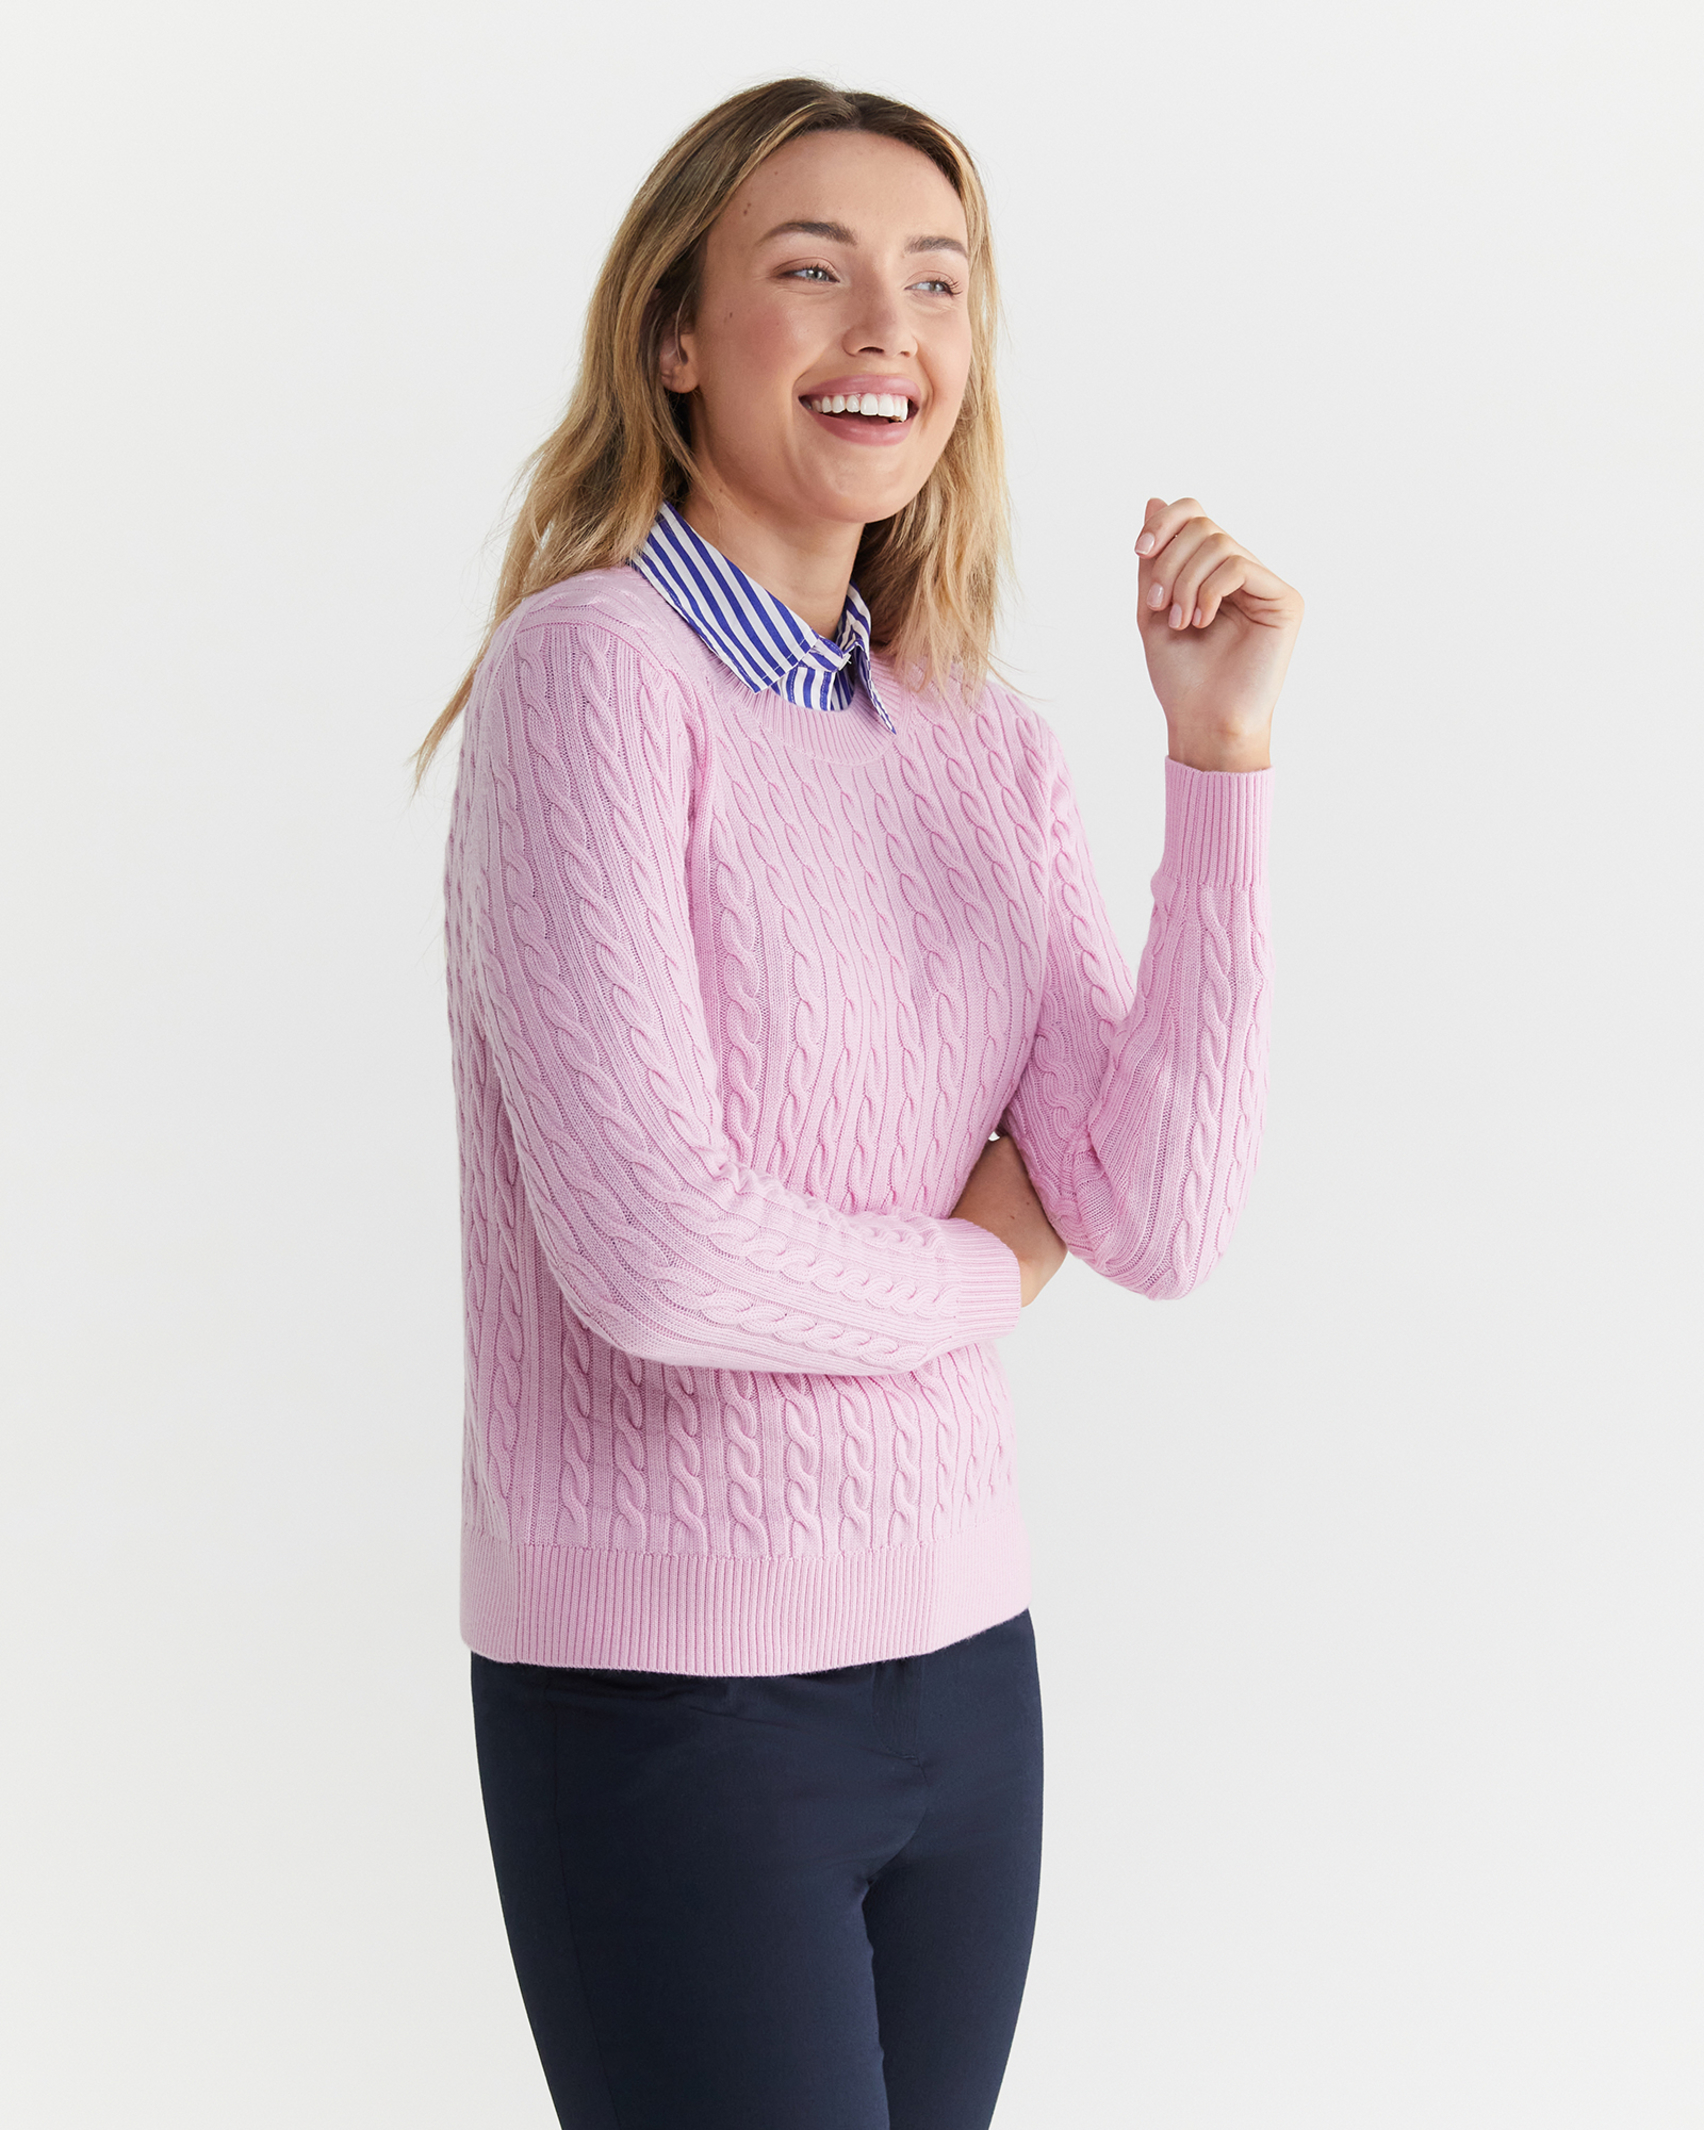 Merino Wool Baby Cable Sweater in BABY PINK